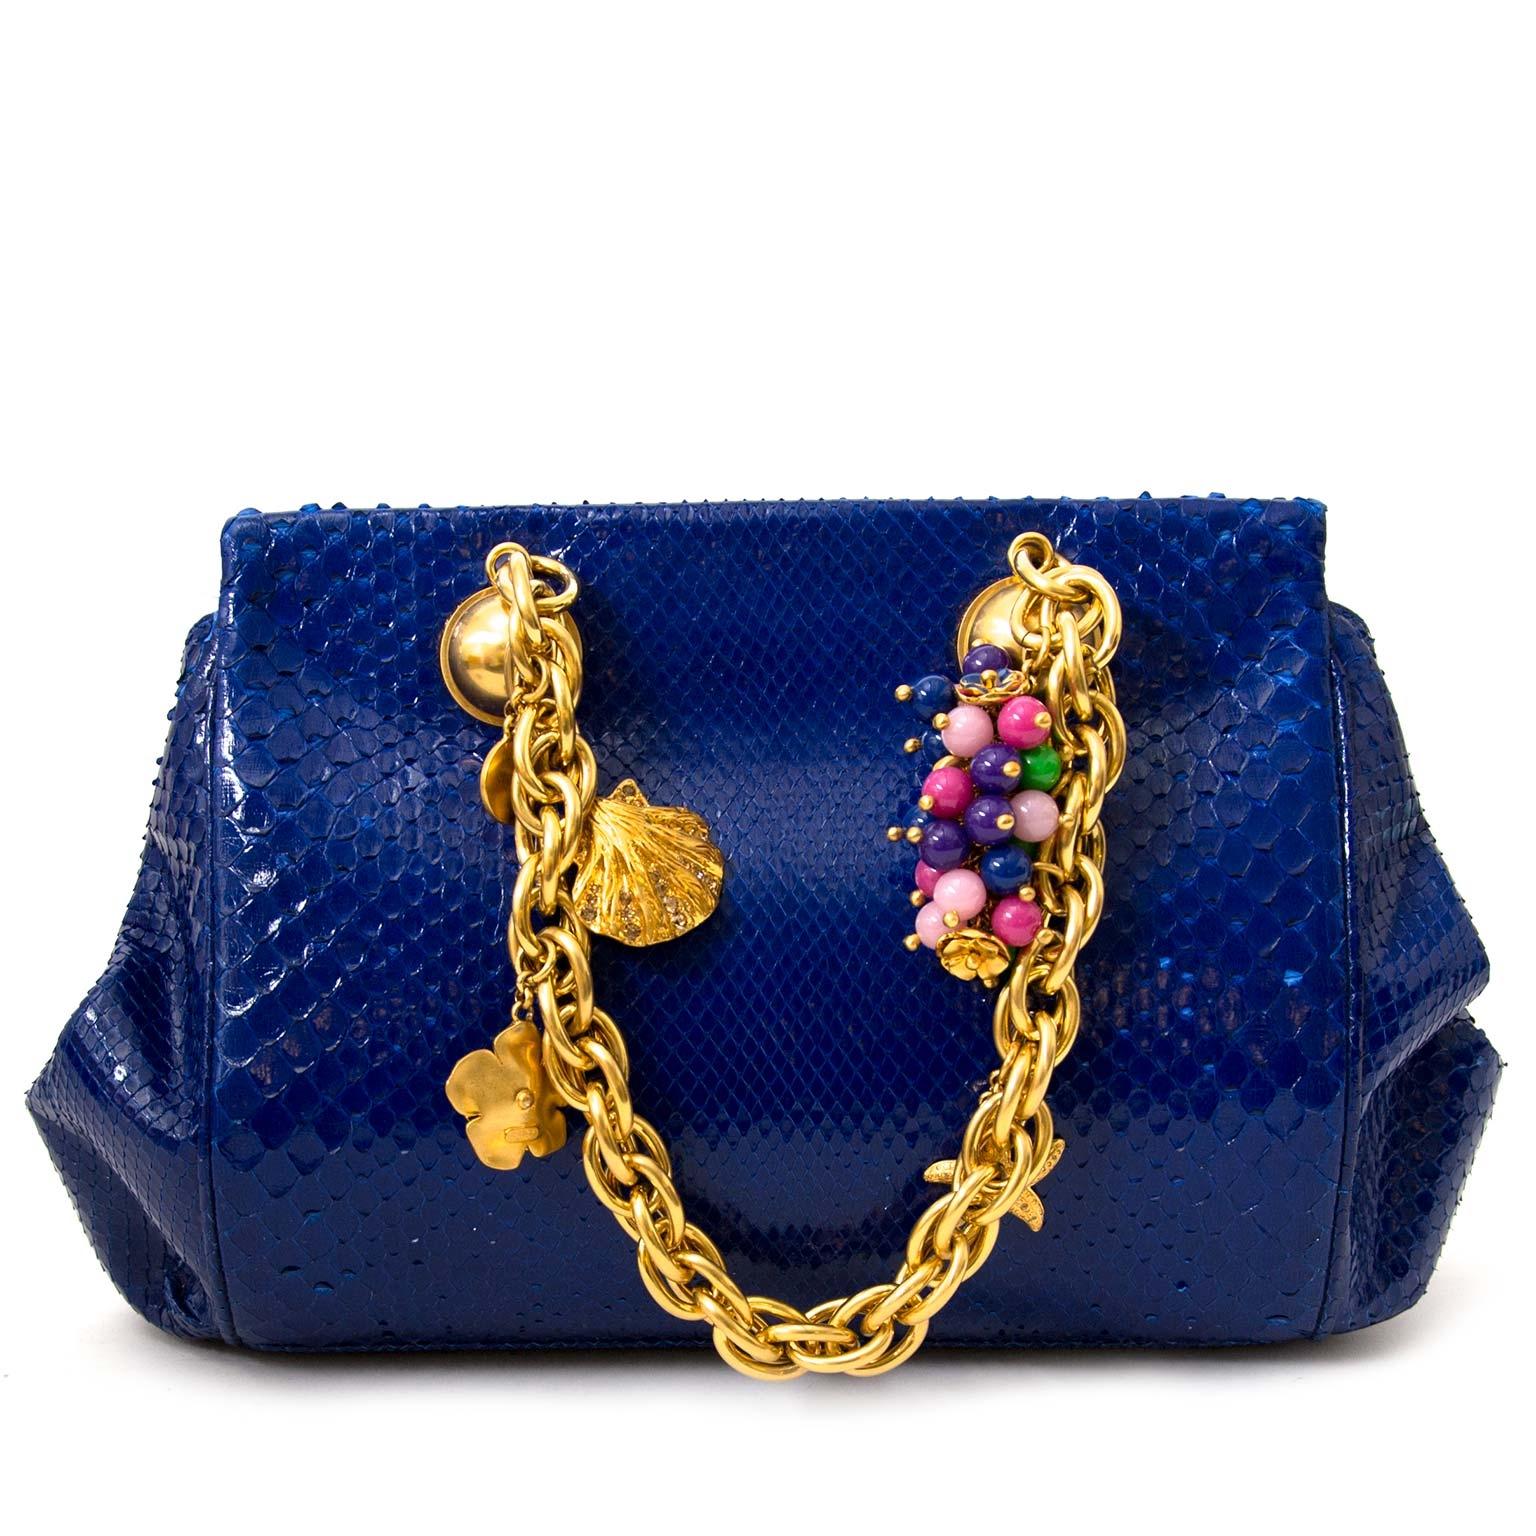 blue and gold bag